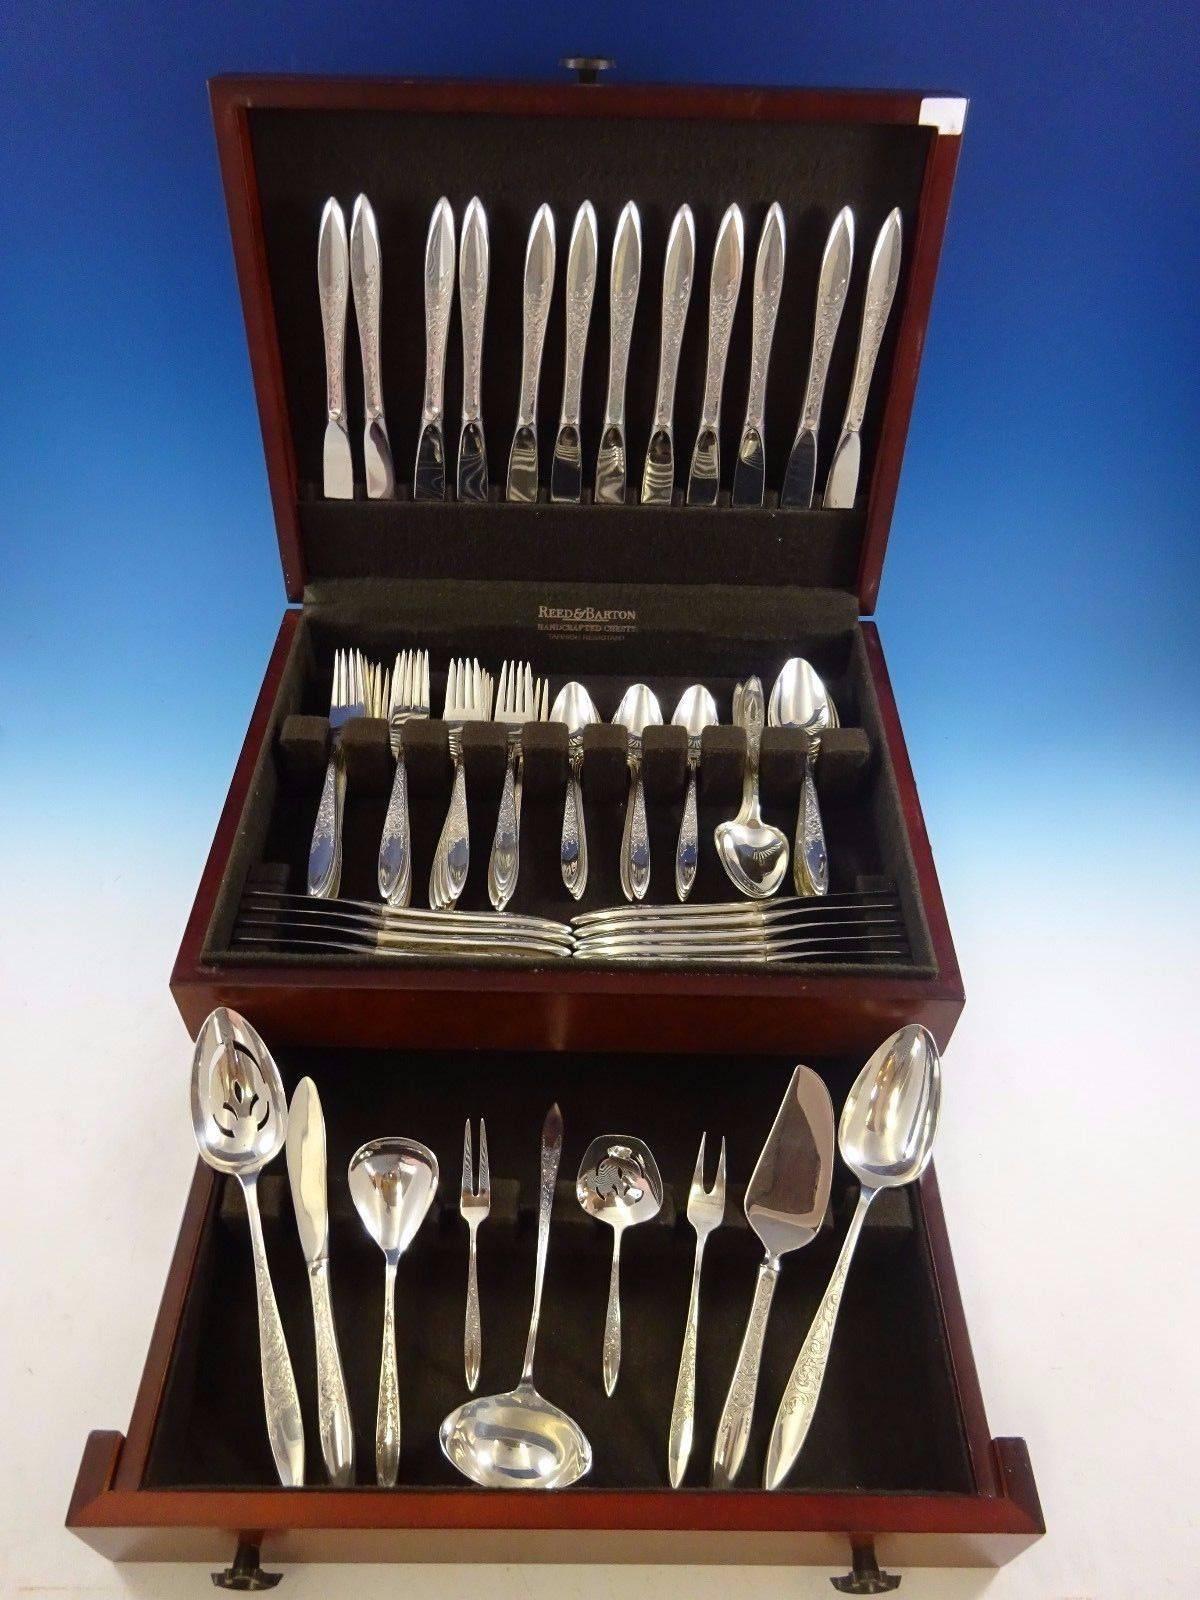 Lovely White Paisley by Gorham sterling silver flatware set of 81 pieces. This set includes:

12 knives, 8 7/8